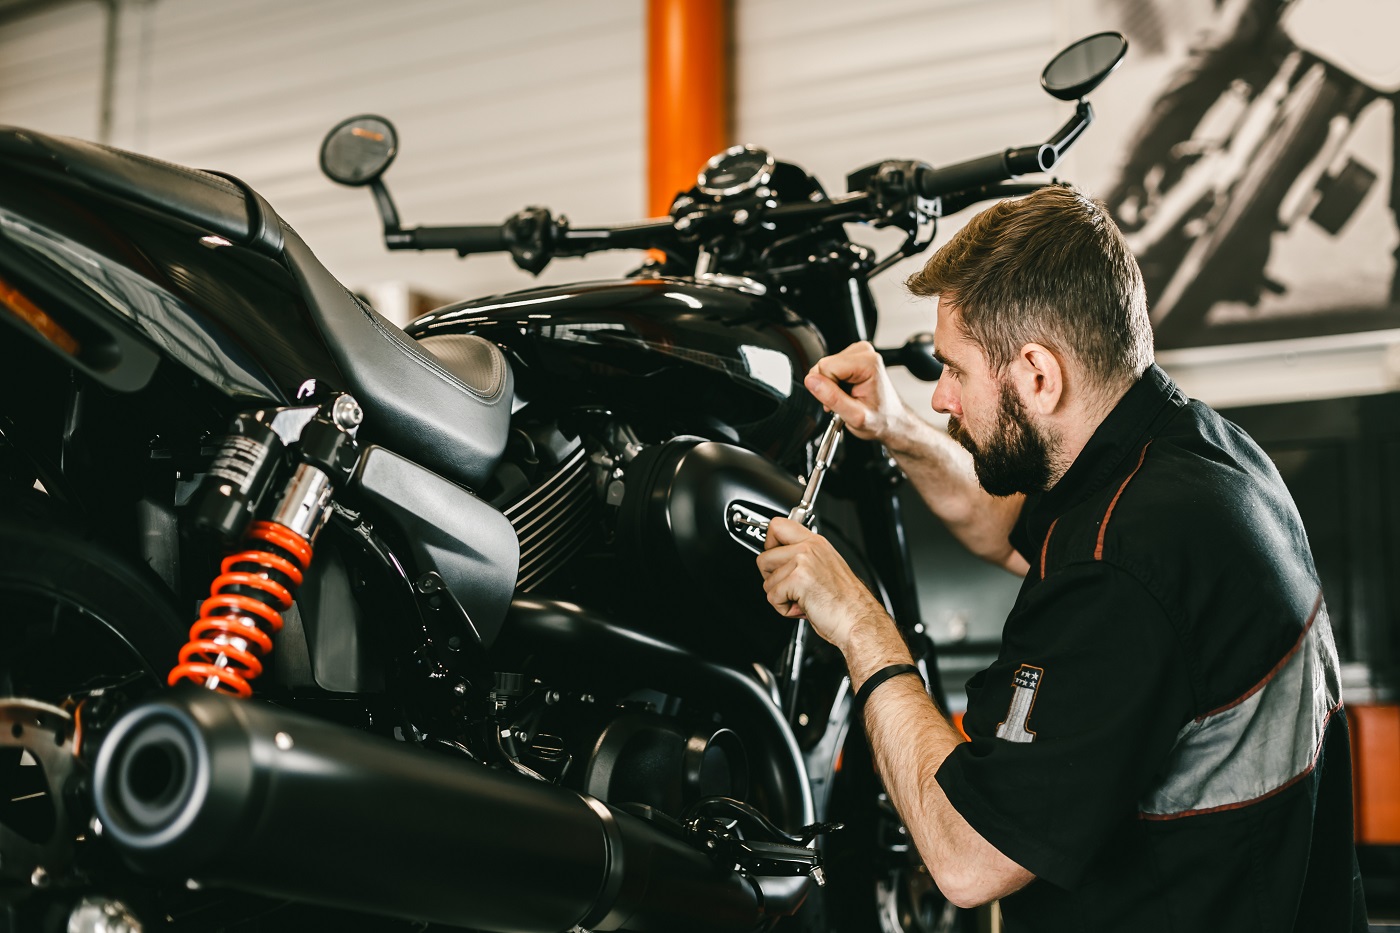 Professional mechanic working screwdriver and motorcycle repairs